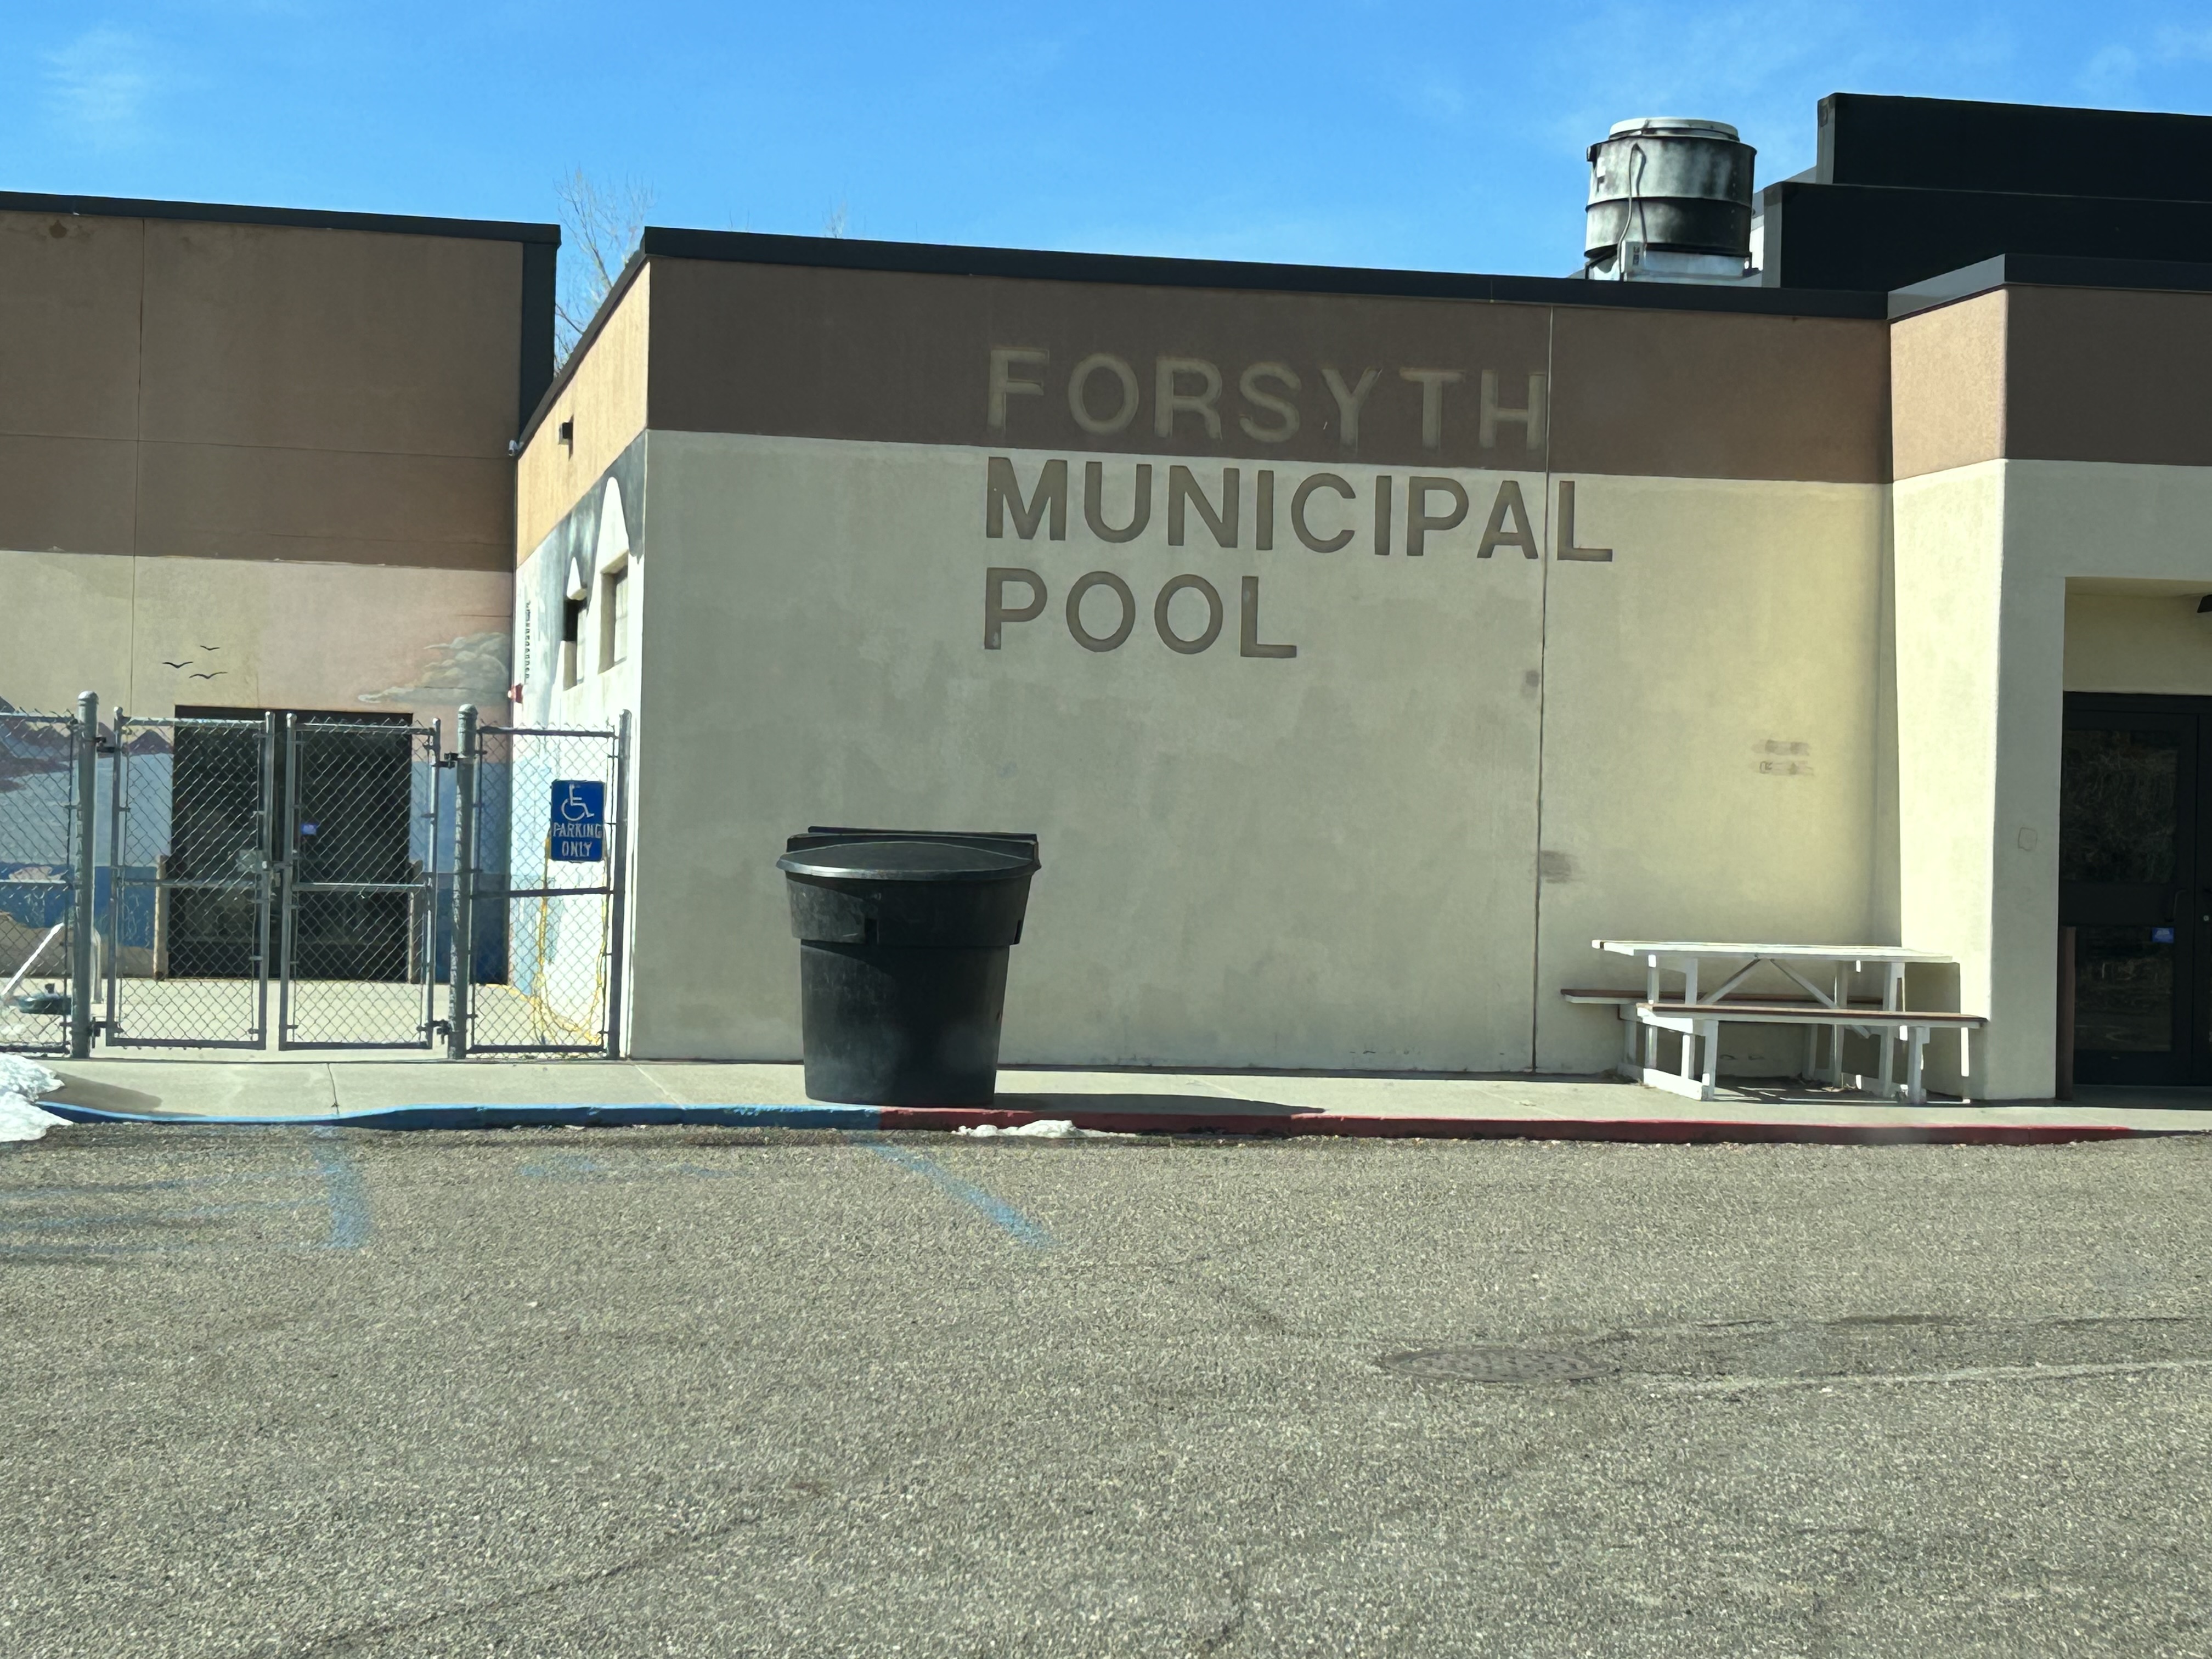 Outside of Forsyth Municipal Pool building.